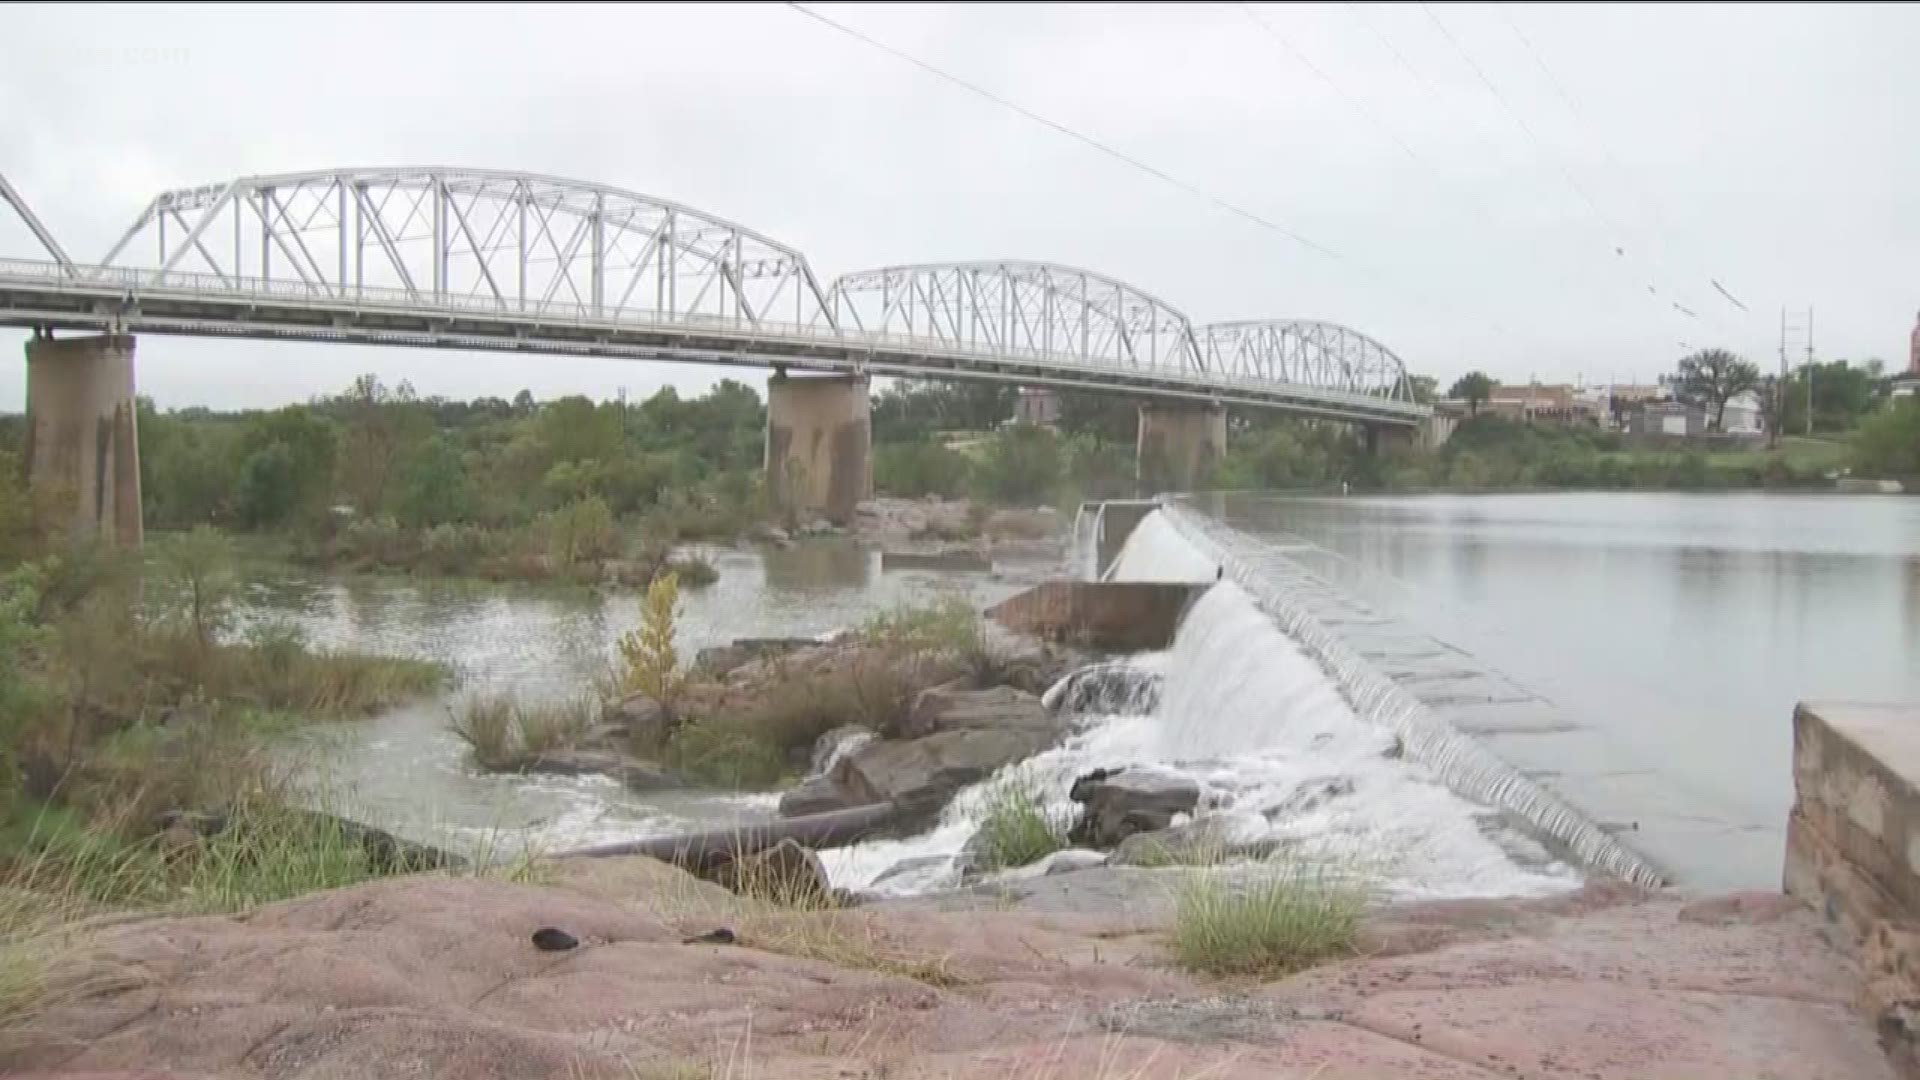 Flooding quickly exceeded expectations in Llano County Monday as fast waters moved through the area.